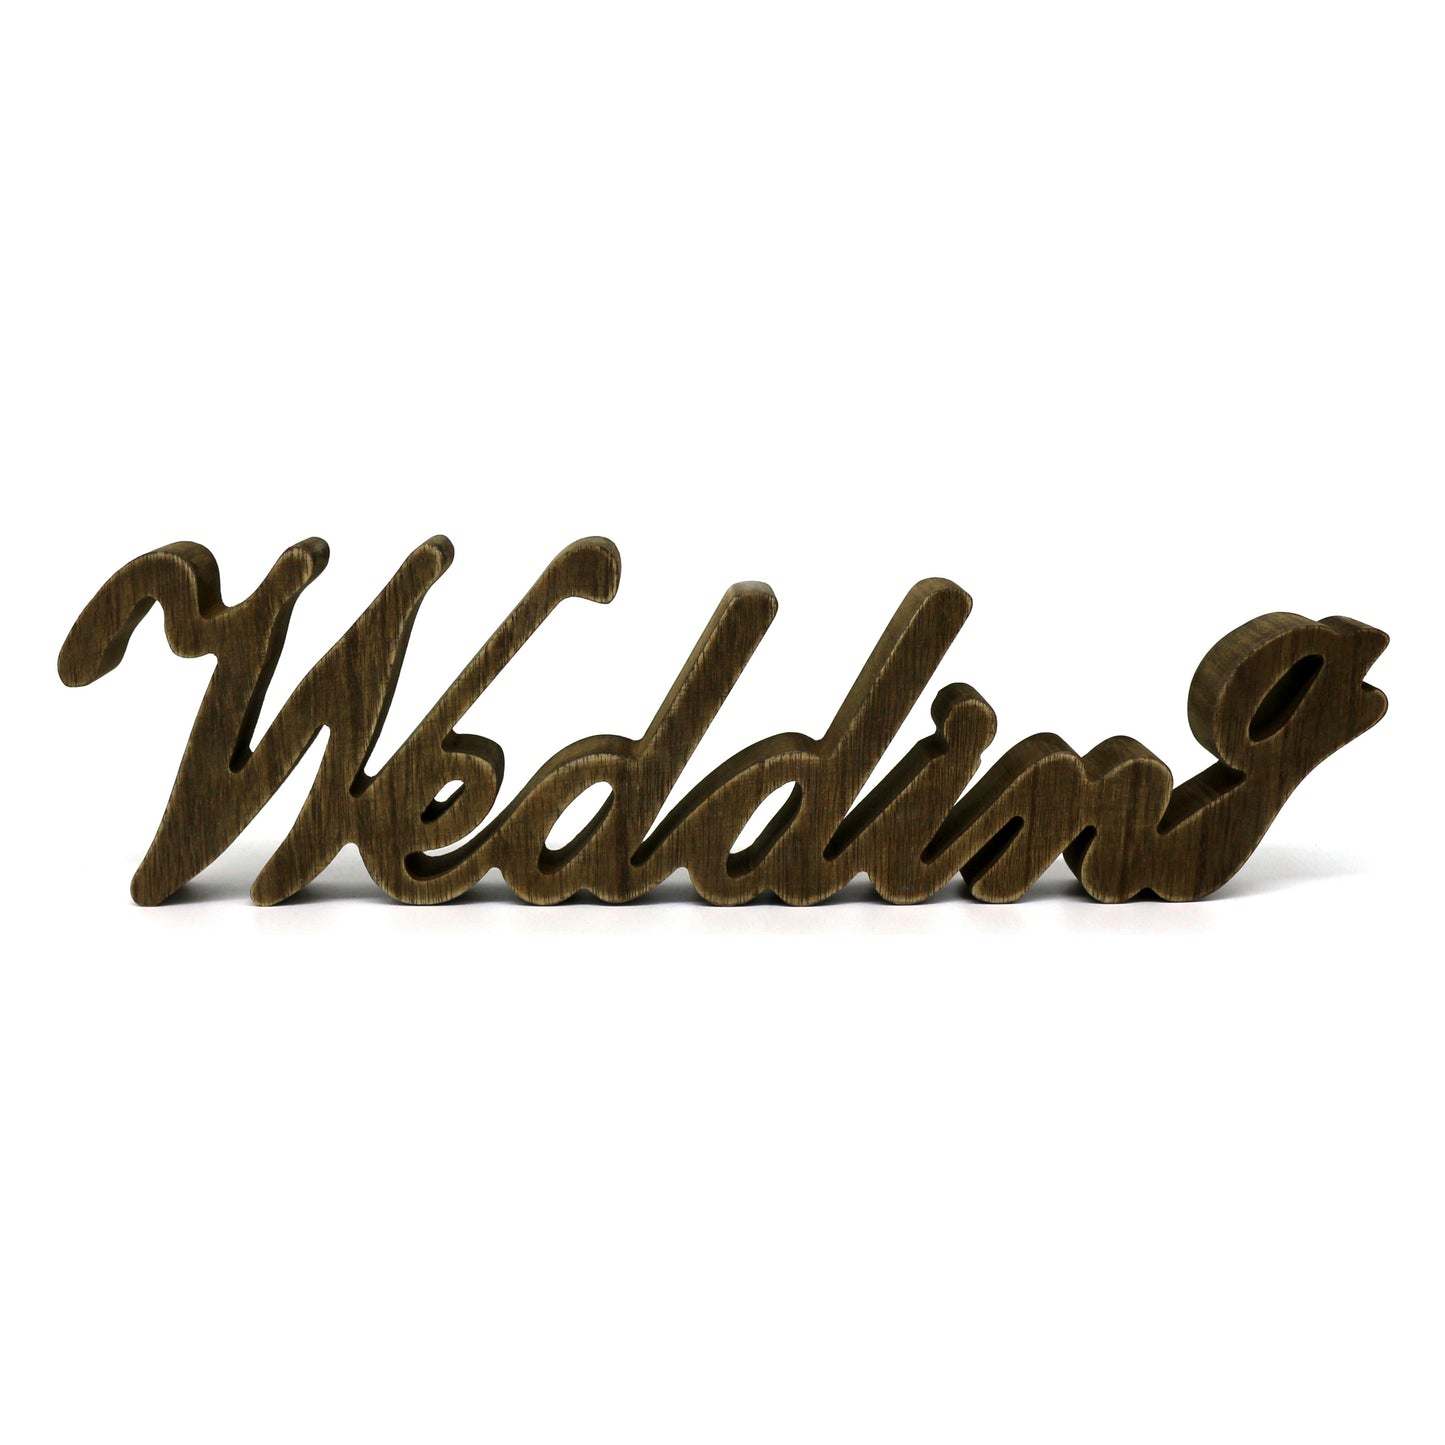 CVHOMEDECO. Rustic Vintage Distressed Wooden Words Sign Free Standing "Wedding" Tabletop/Shelf/Wall/Wedding/Party Decoration Art, 15.5 x 4.25 x 1 Inch